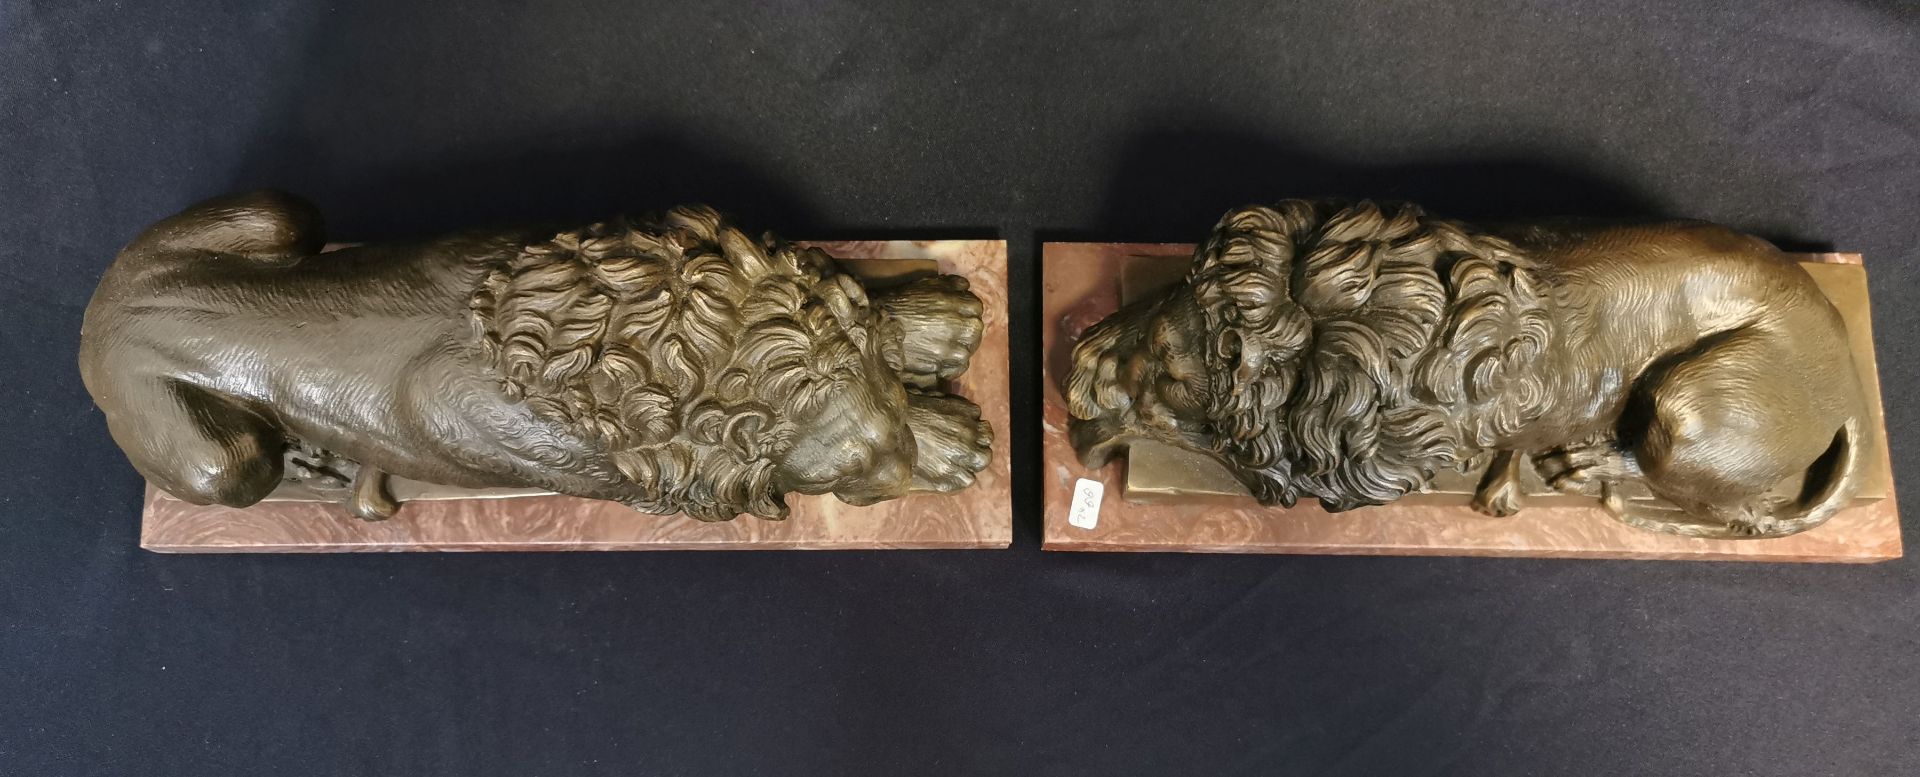 SCULPTURES: "LIONS" - Image 2 of 4